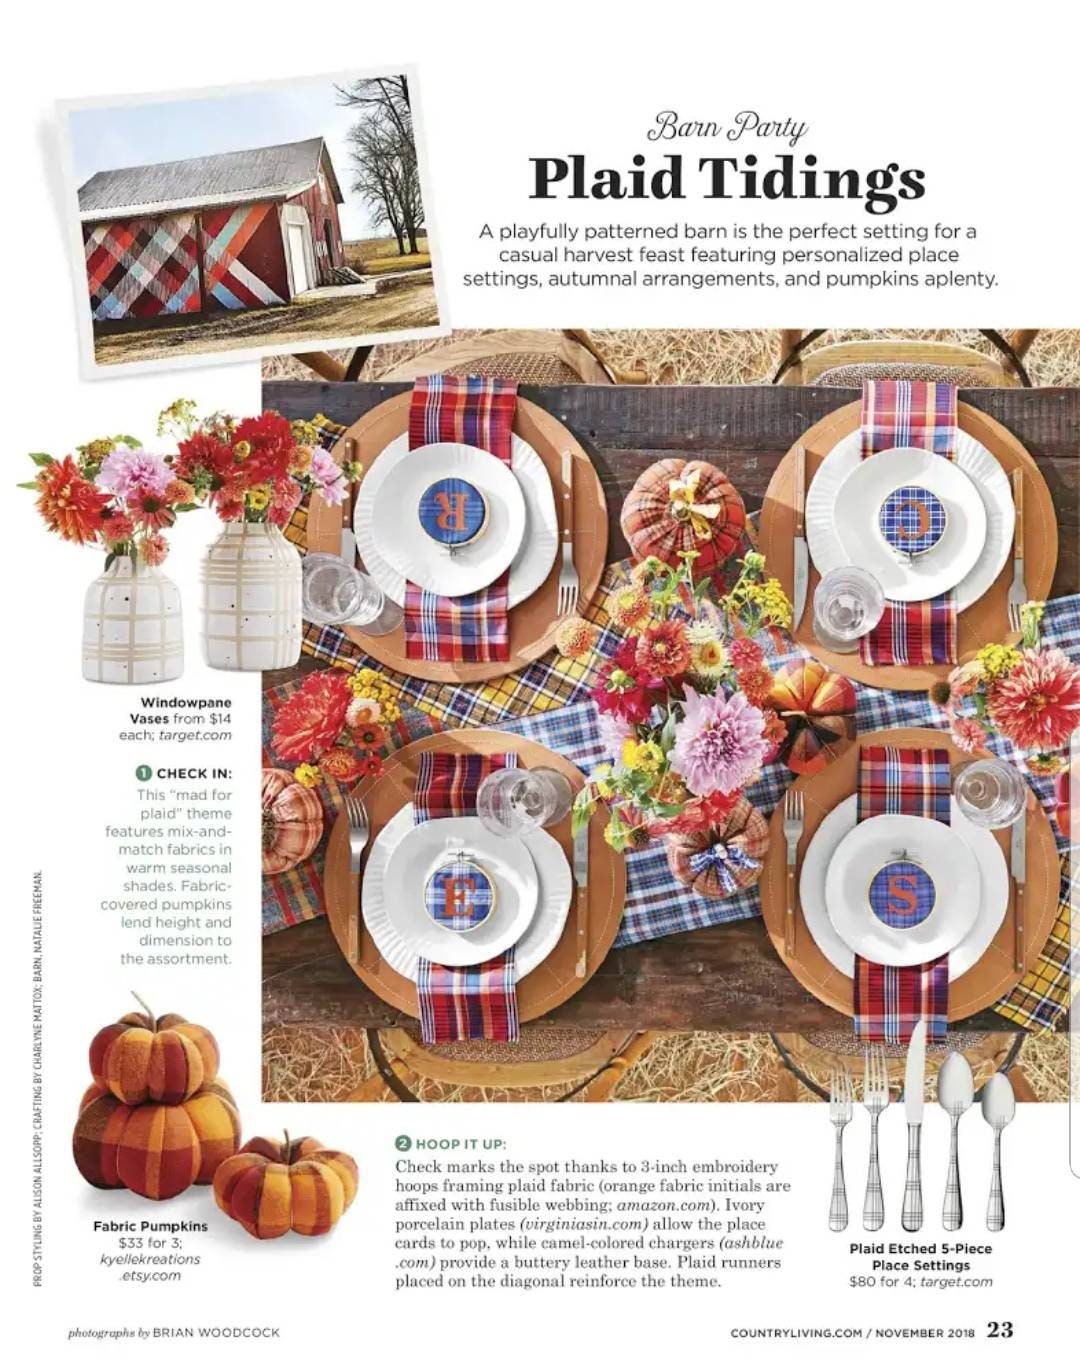 KyElle Kreations Pumpkin trio displayed in Country Living Magazine, Novemeber 2018 edition page 23. Accented on a Harvest tablescape with plateware and floral decor. 